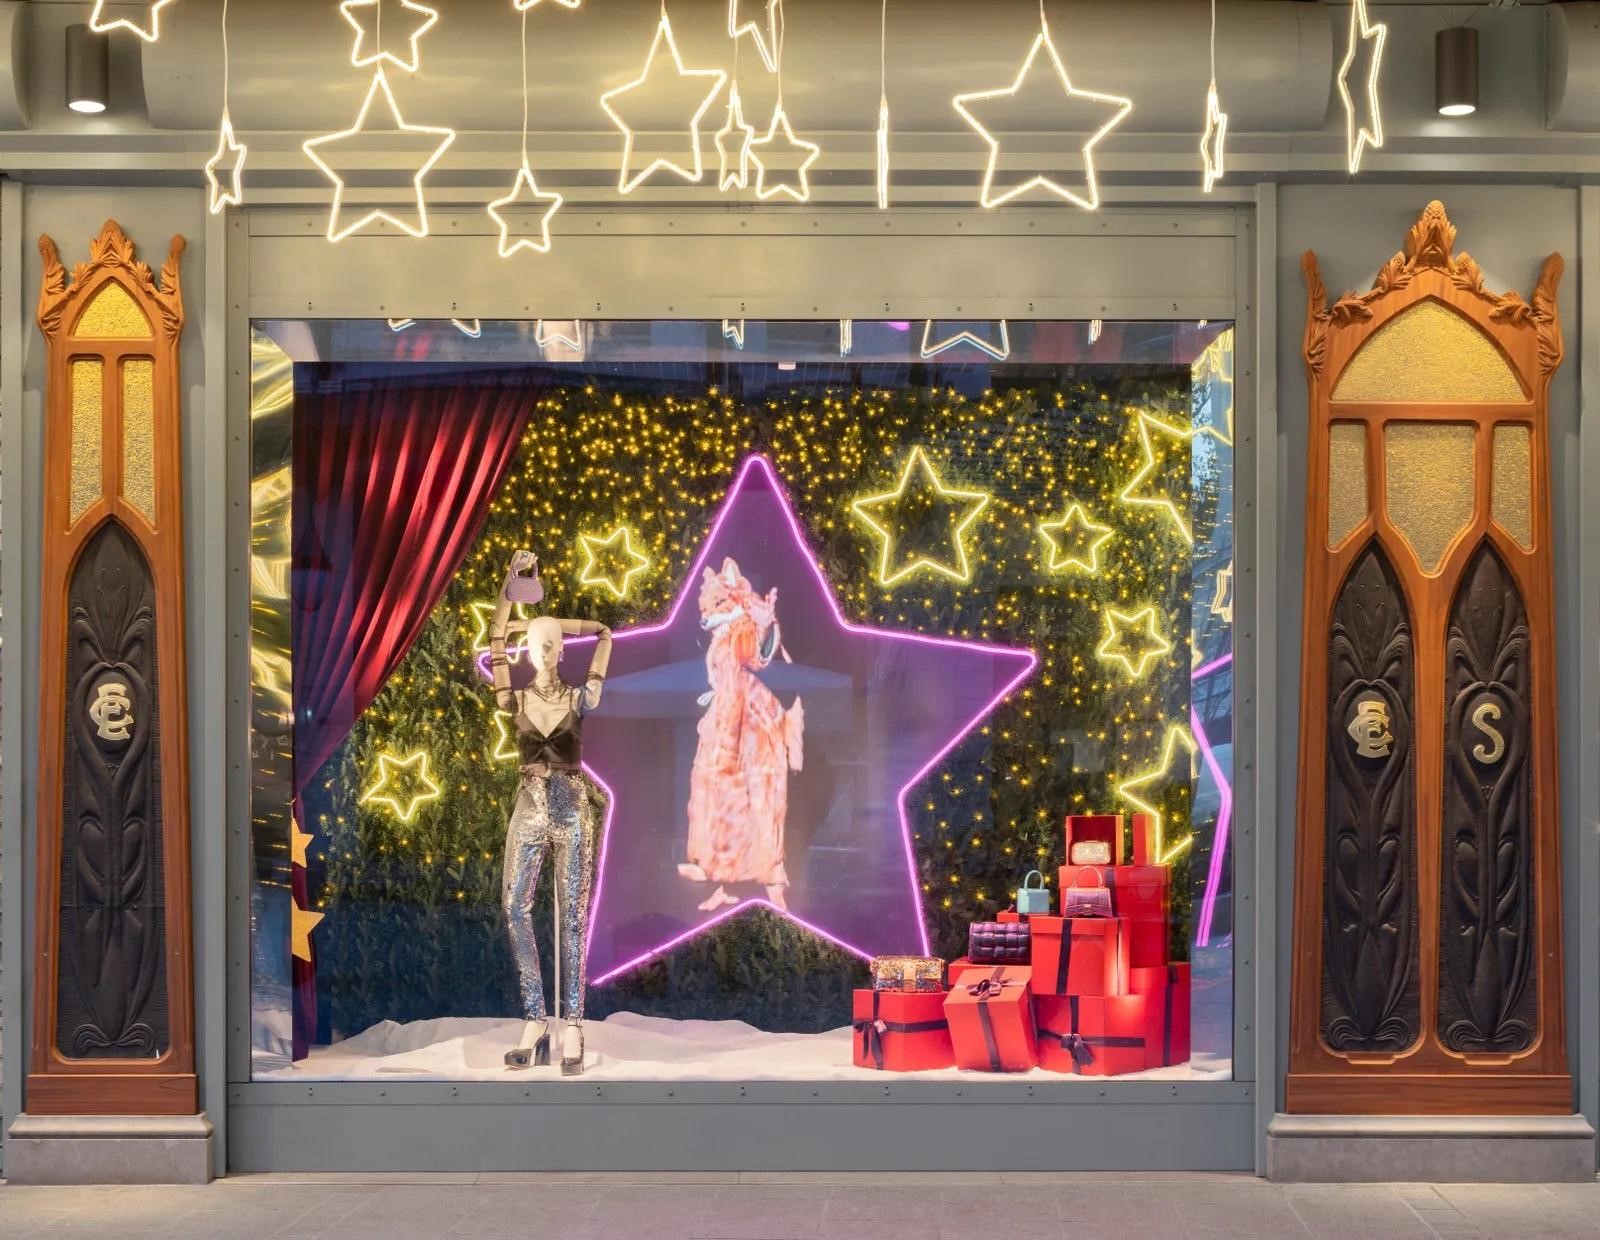 Very Peri color theme storefront with a Chrsitmas-motif set-up consisting mannequin, bunch of gifts, star light and a she-fox figure in the center of a star